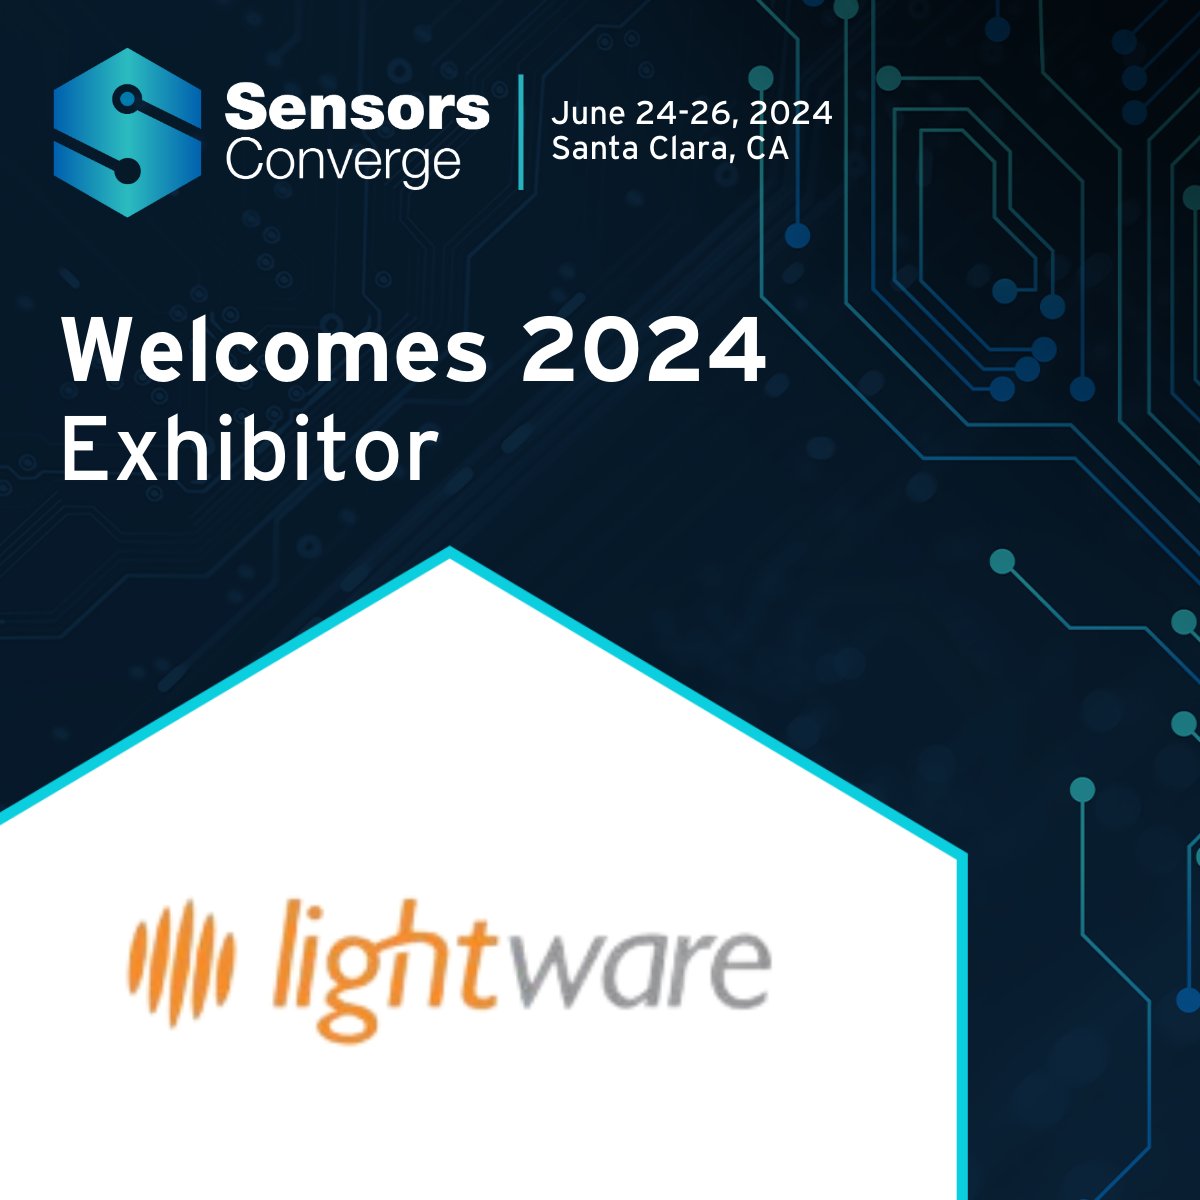 Welcome LightWare to #SensorsConverge

LightWare is a pioneer in LiDAR technology and has evolved this powerful extra-sensory capability into compact, ultralight, and high-performing sensors. Learn more: lightwarelidar.com

June 24-26 in Santa Clara sensorsconverge.com/sensorsconverg…